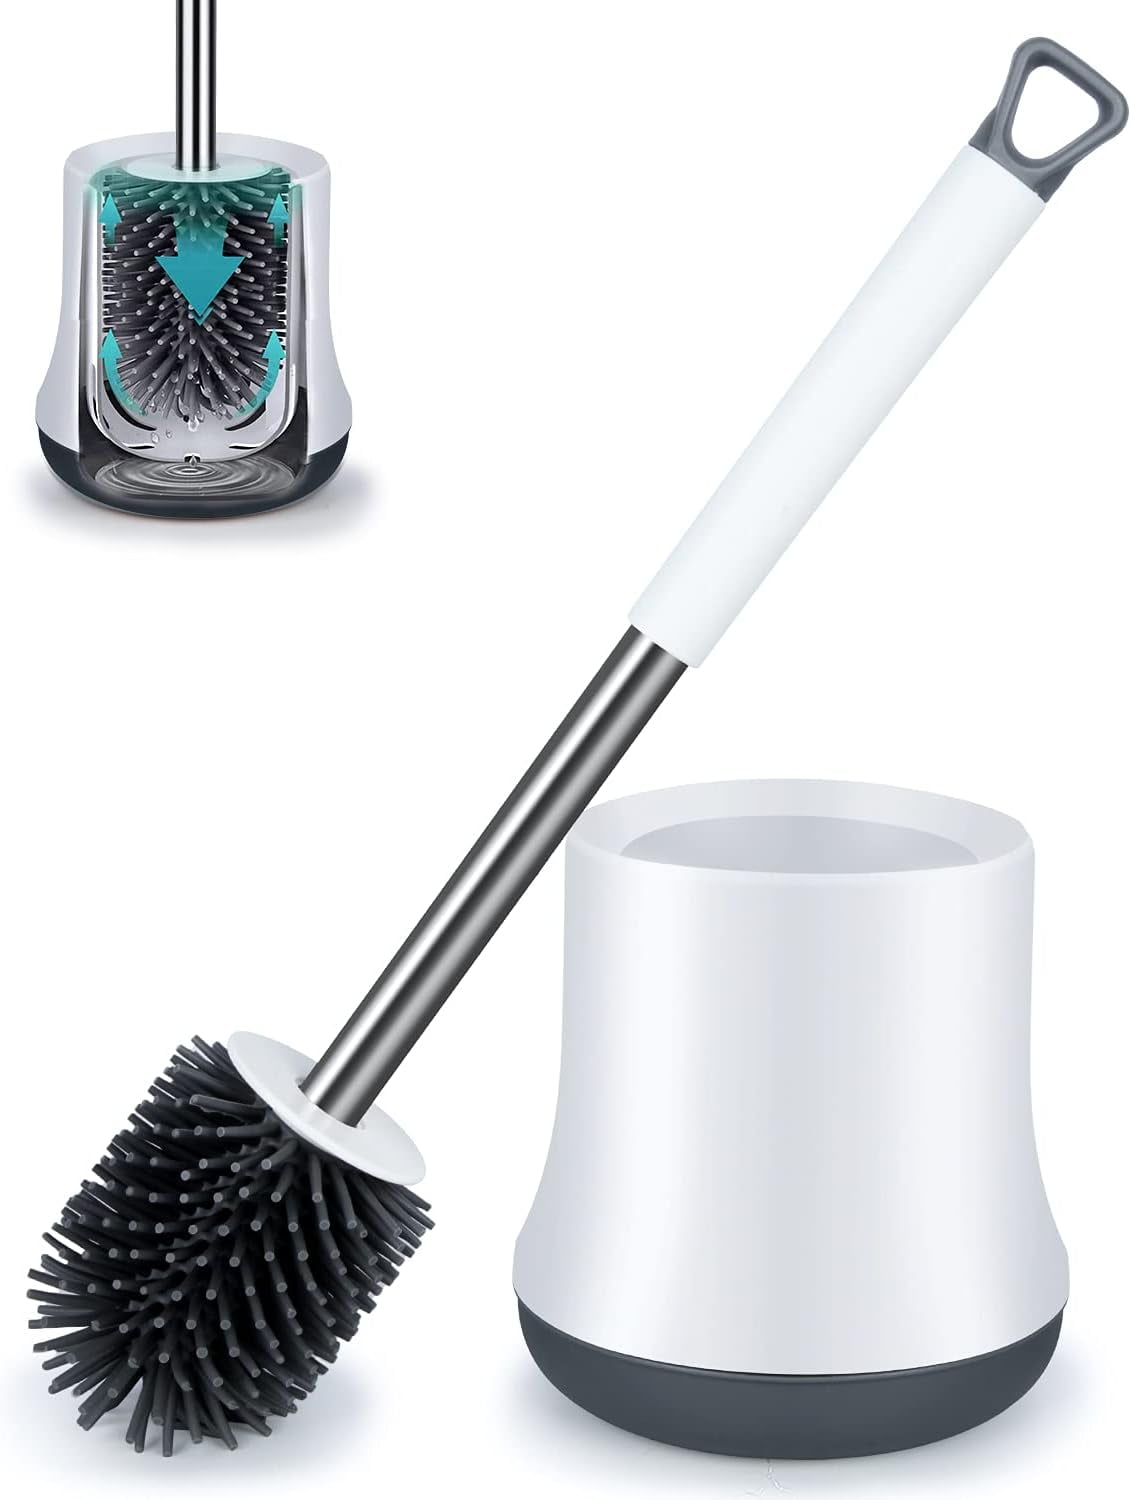 SUGARDAY Toilet Brush and Holder Caddy Plunger Set 2 Pack Toilet Bowl Brush  for Bathroom Scrubber